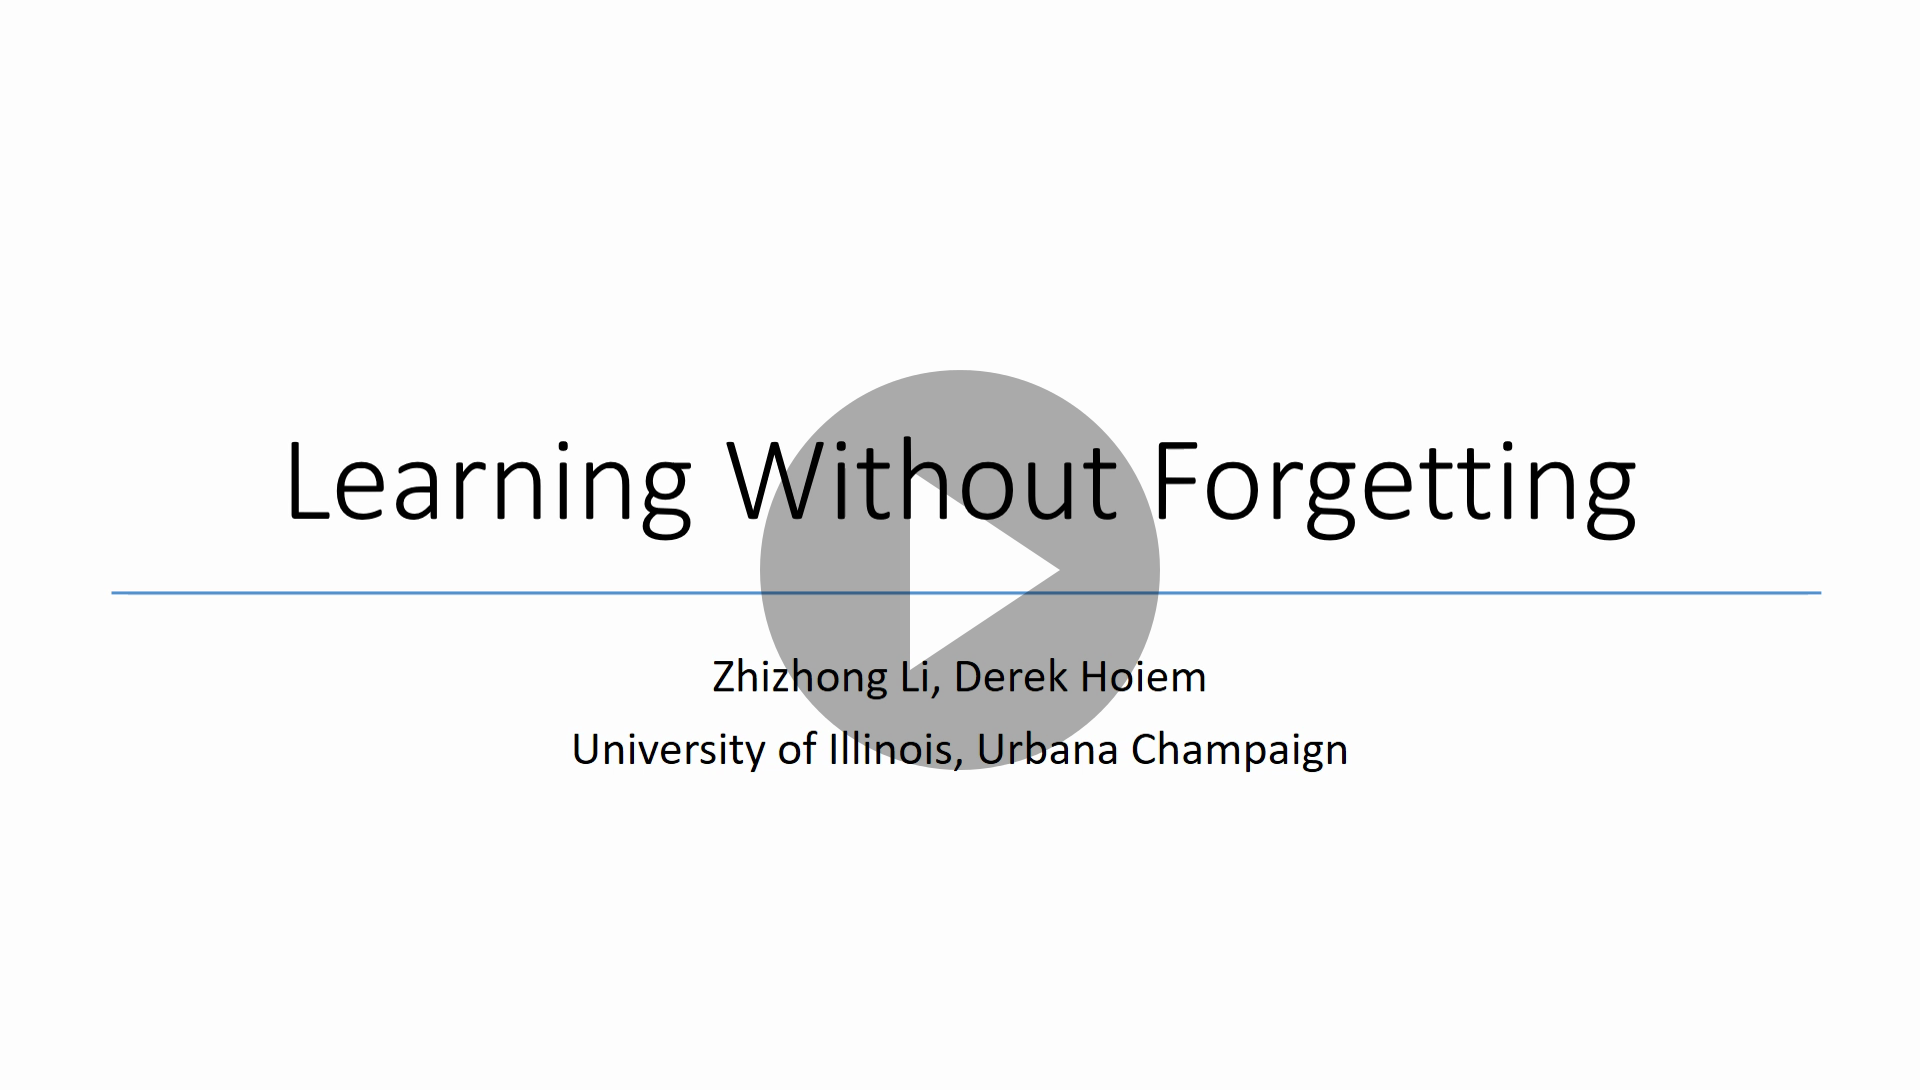 Learning without Forgetting spotlight video